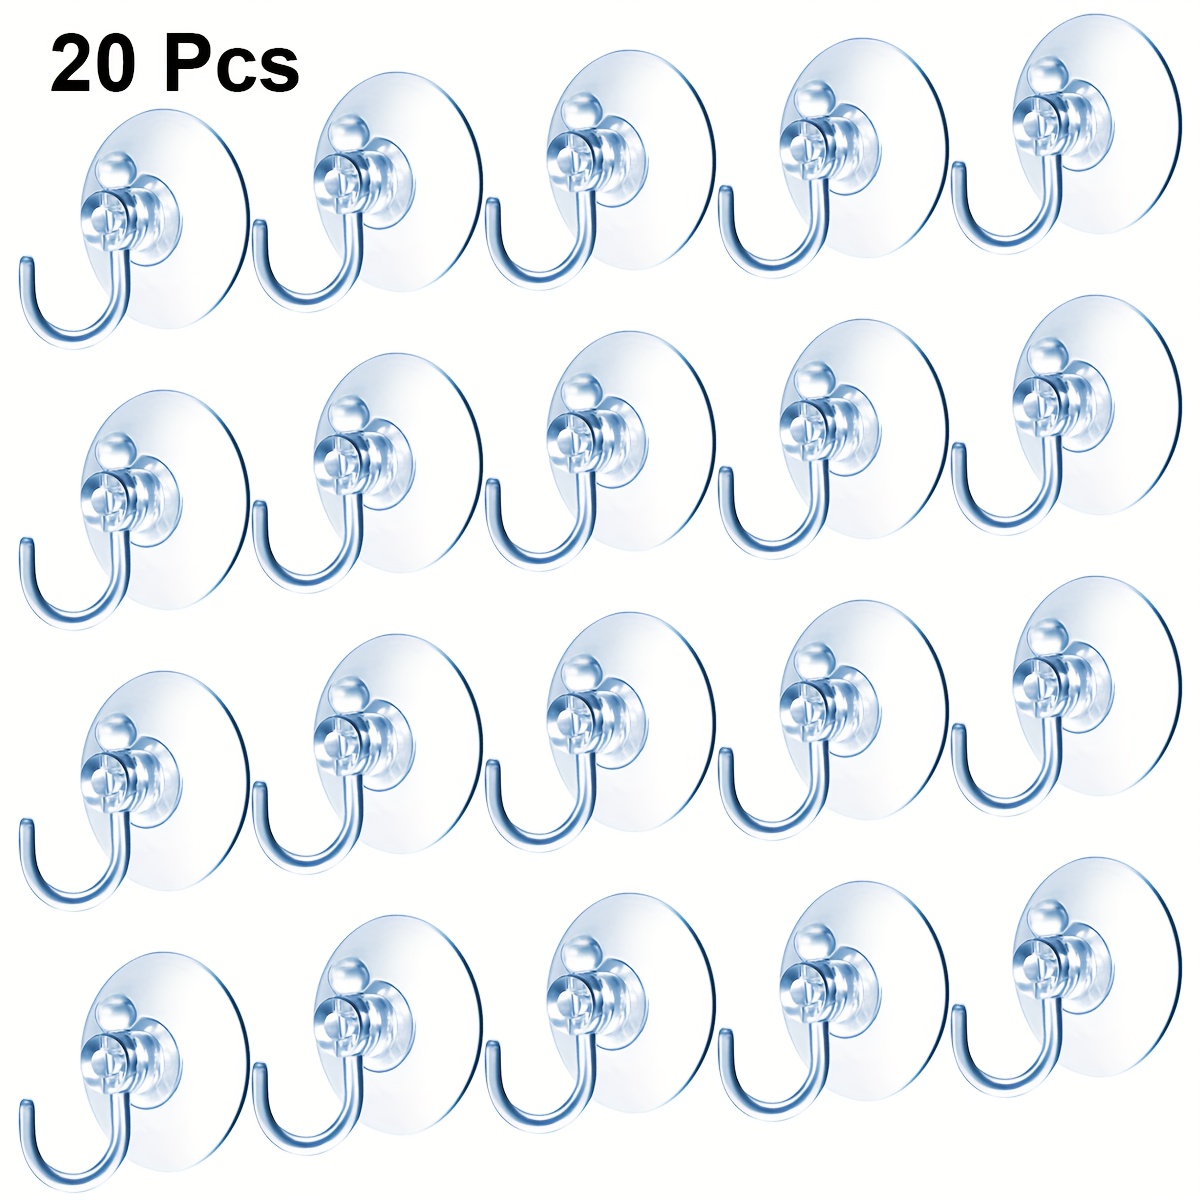 

20pcs Suction Cup Hooks, Clear Plastic Sucker Pads Hook For Window Glass Shower Bathroom Kitchen Wall, Festivals Parties Carnival Decoration Auxiliary Hook